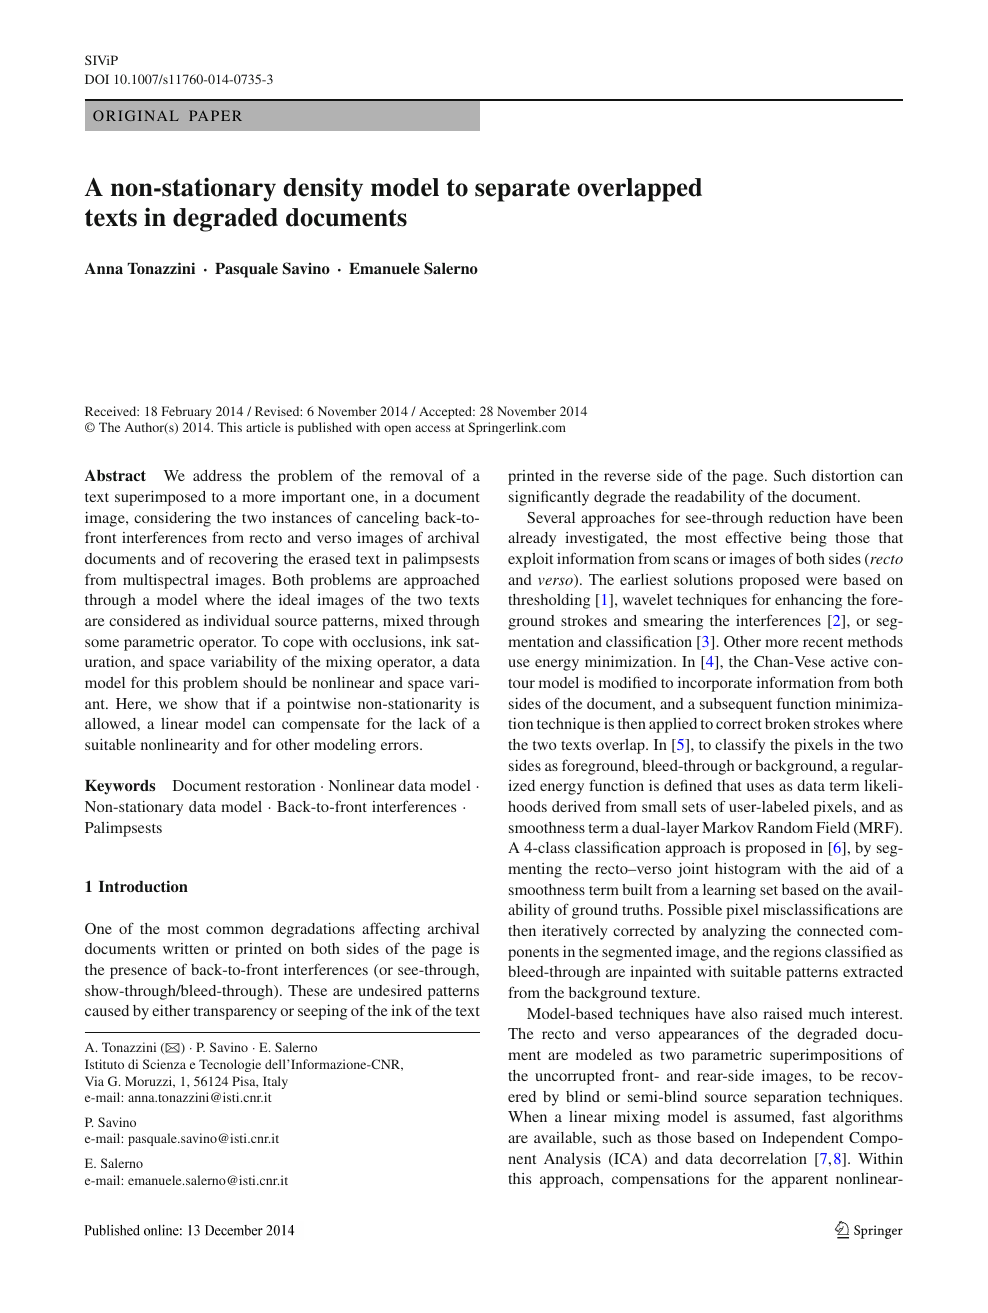 A Non Stationary Density Model To Separate Overlapped Texts In Degraded Documents Topic Of Research Paper In Computer And Information Sciences Download Scholarly Article Pdf And Read For Free On Cyberleninka Open